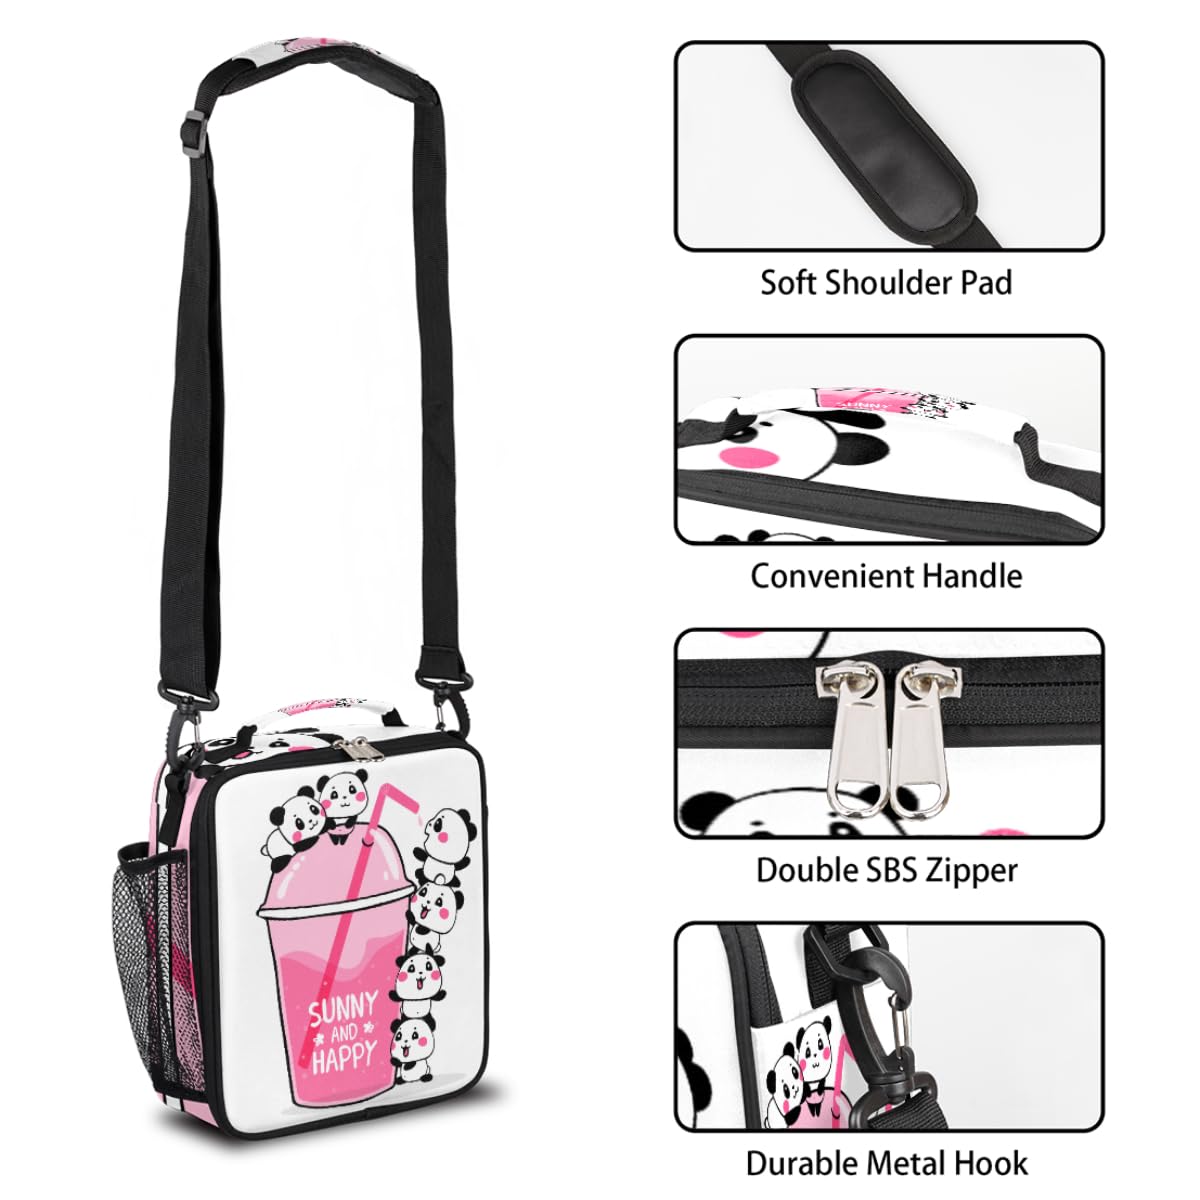 Panda Insulated Lunch Bag, Animal Cocktail Lunch Box for Kids Reusable Container Organizer Tote Bag Cooler Thermal Handbag with Adjustable Shoulder Strap for Boys Girls School Daycare Picnic Beach